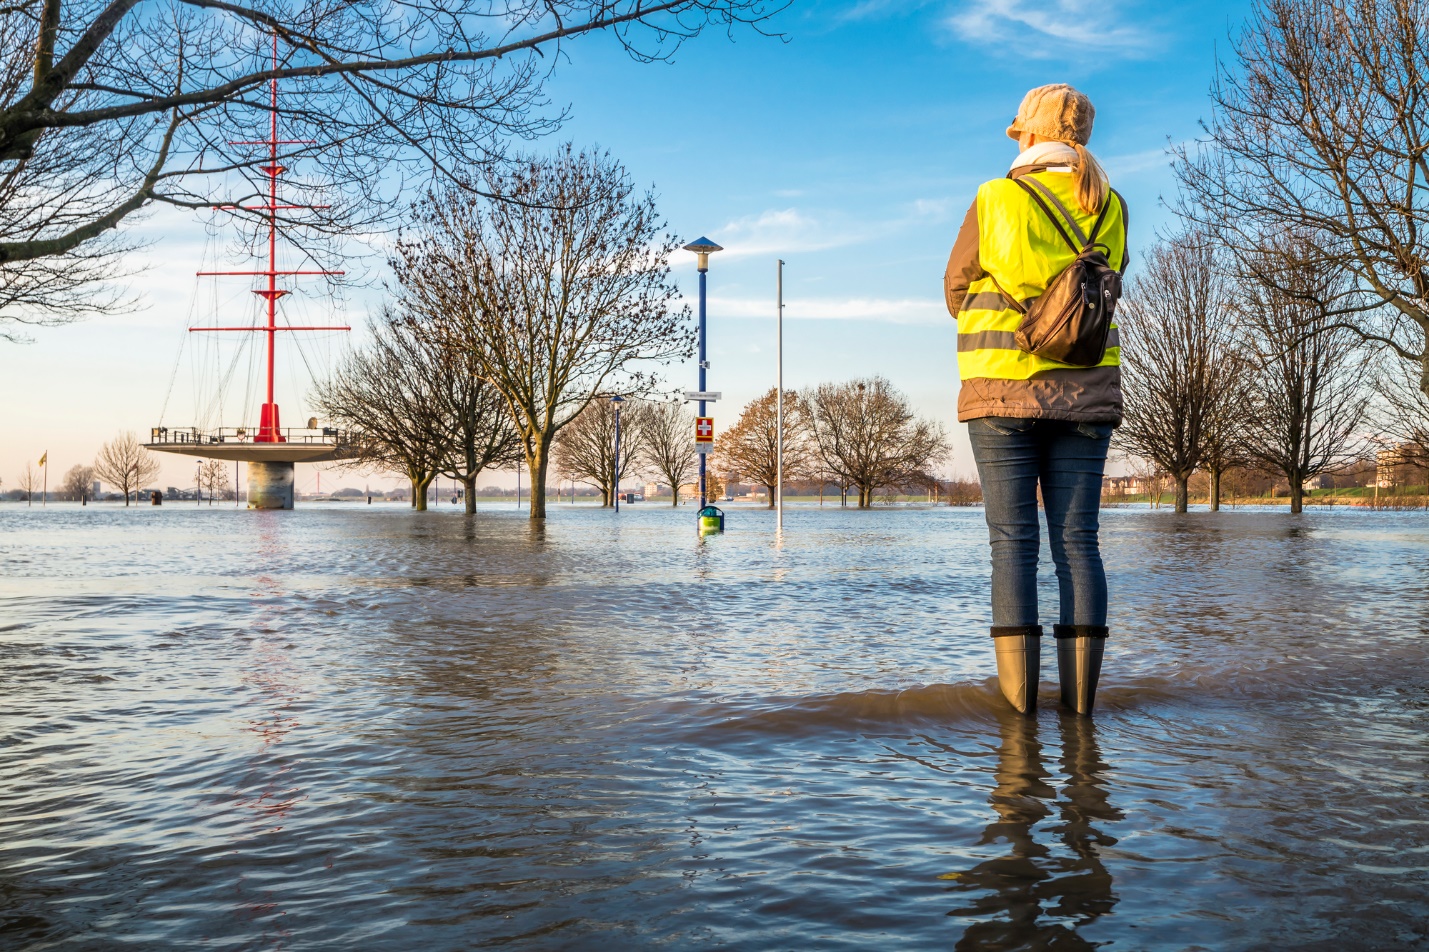 A person standing in a flooded area

Description automatically generated with medium confidence